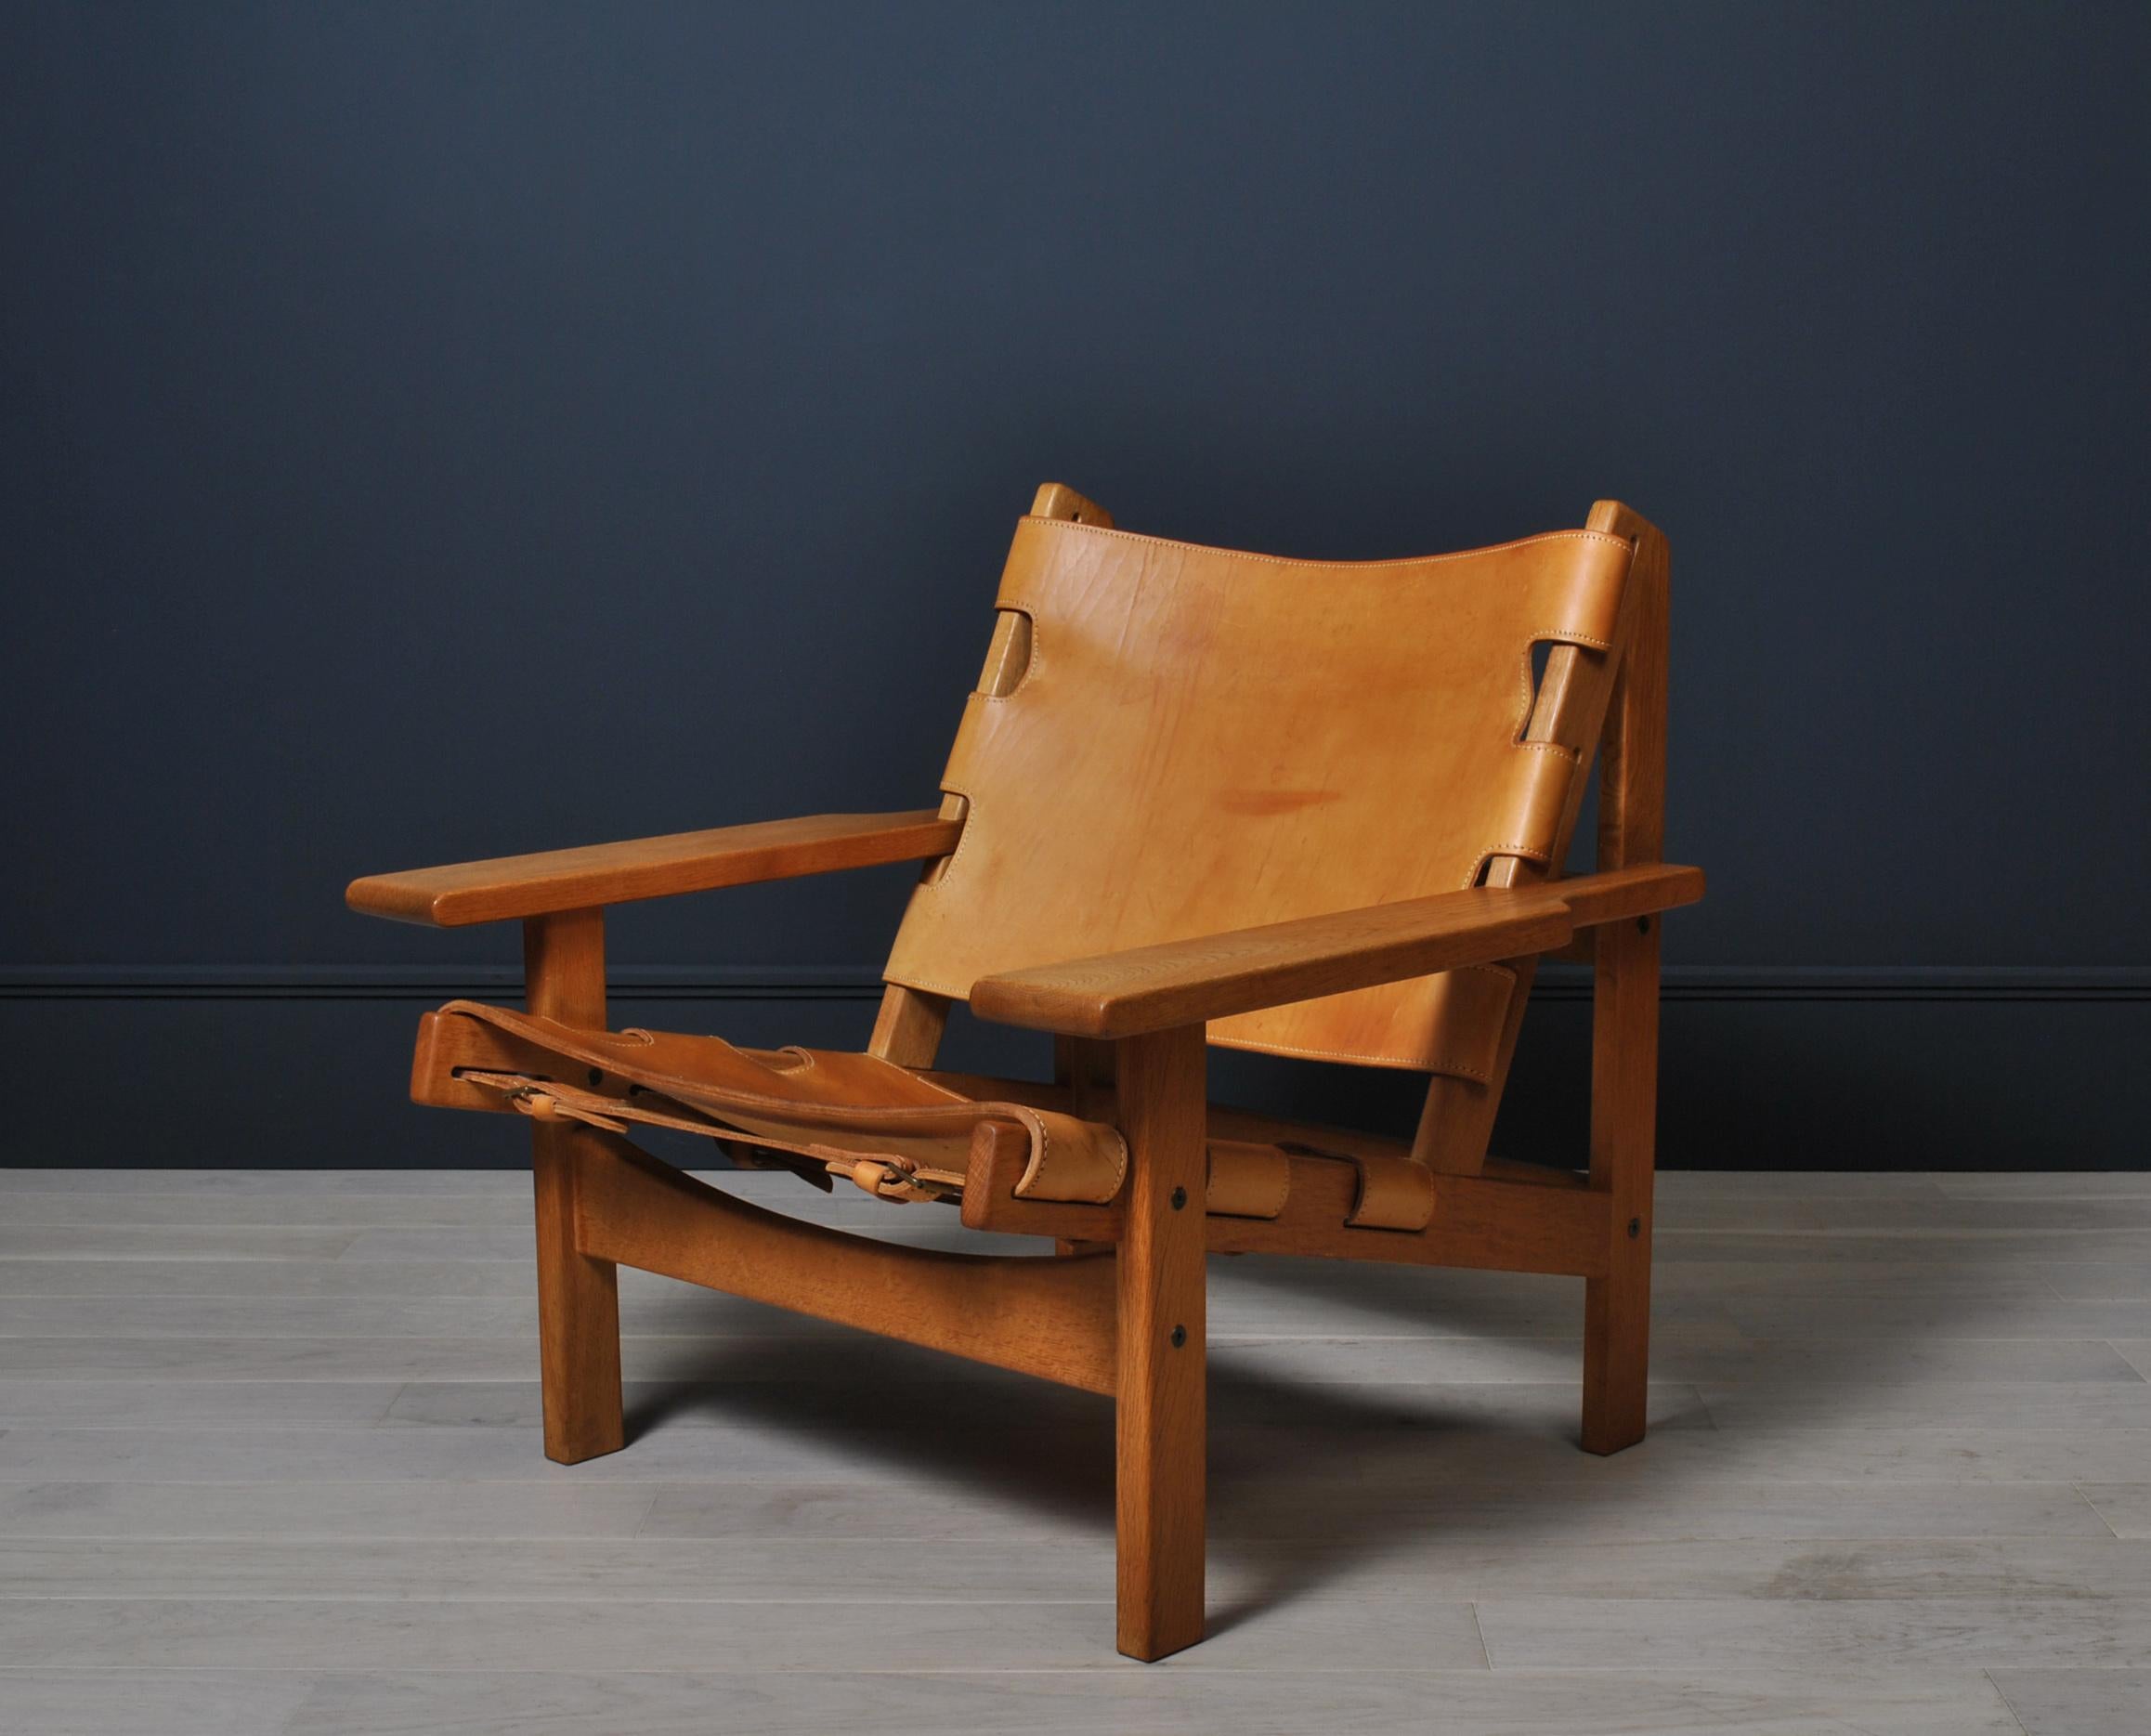 An incredible pair of original classic Kurt Østervig ‘hunting’ chair. Oak frame with thick saddle leather fastened via buckled straps. These are sturdy and bold chairs with wonderful colouring and in very good condition. They have been thoroughly